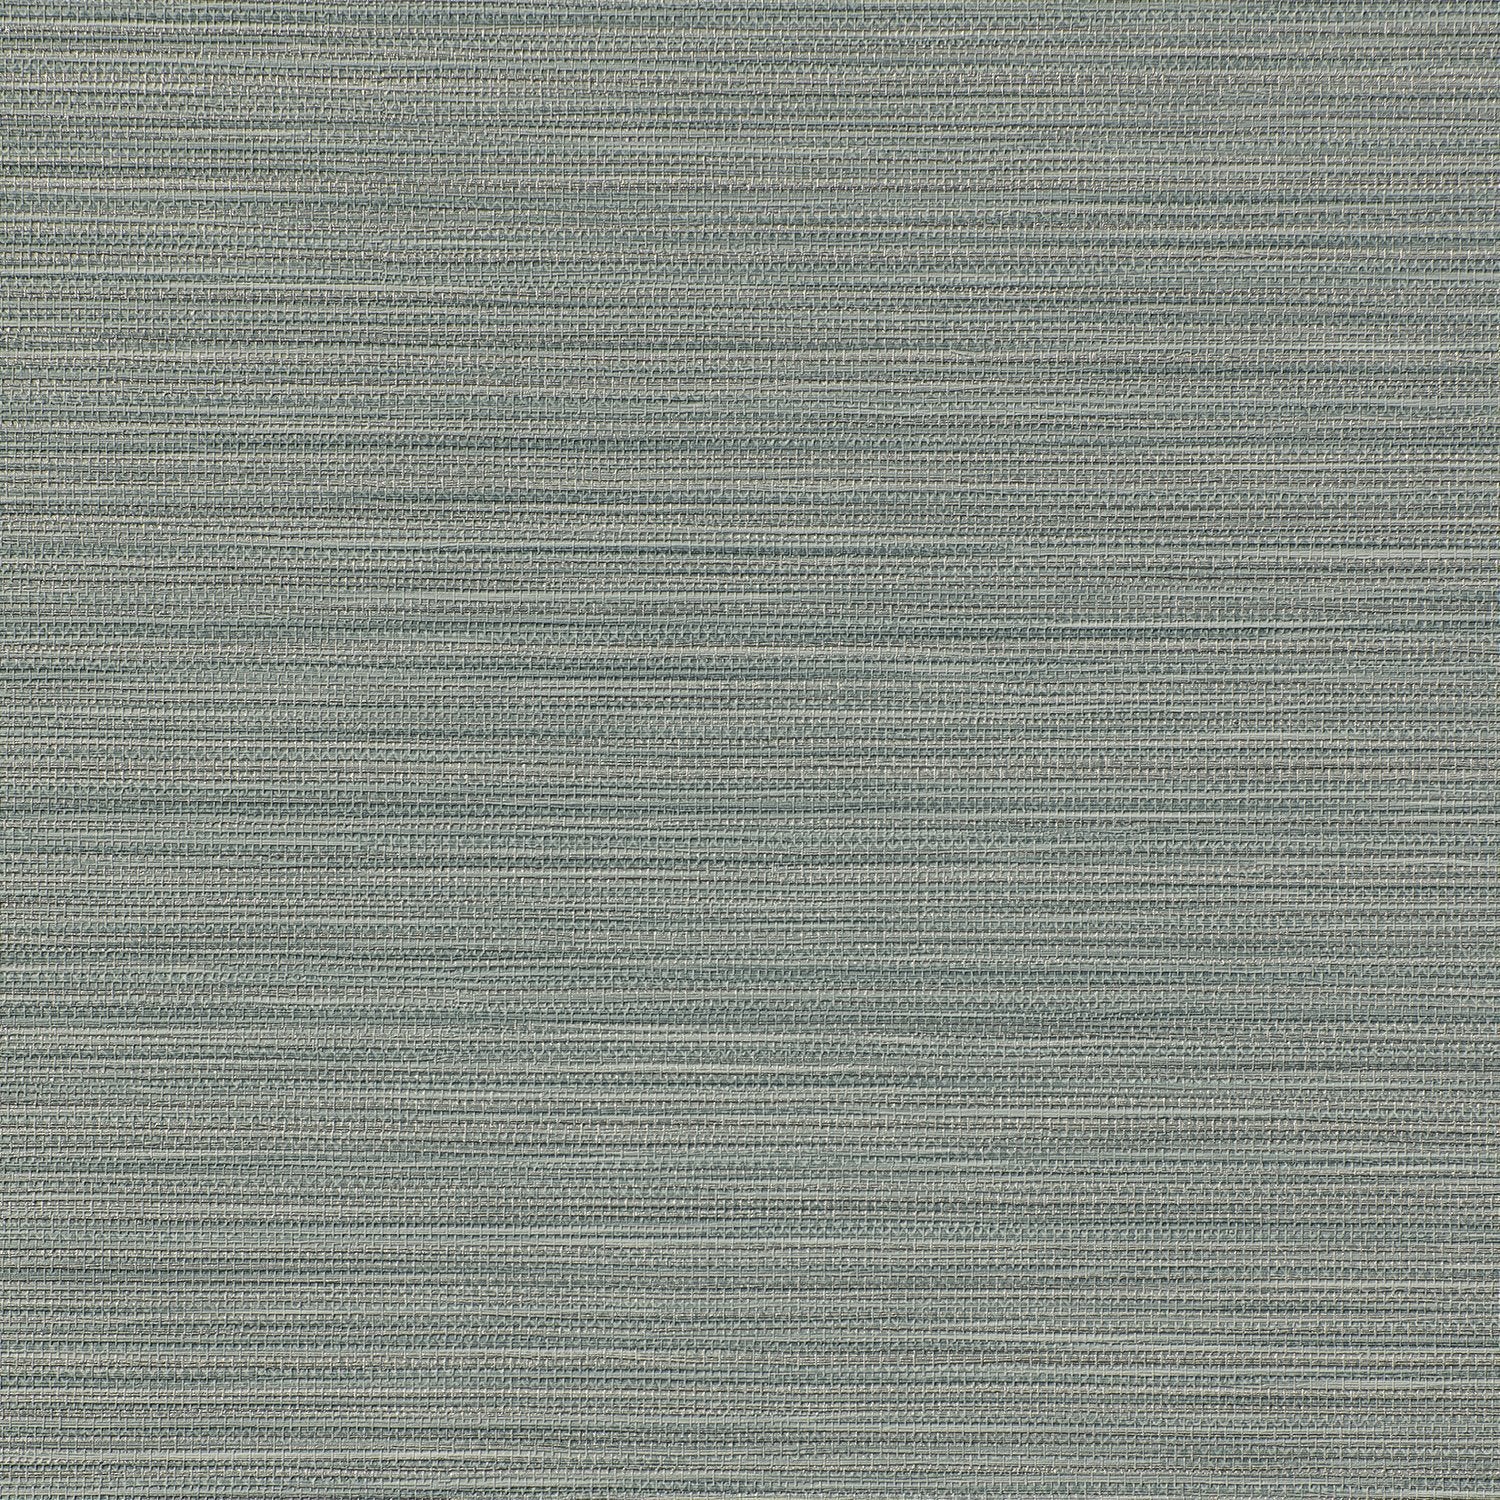 In Stitches - Y47795 - Wallcovering - Vycon - Kube Contract